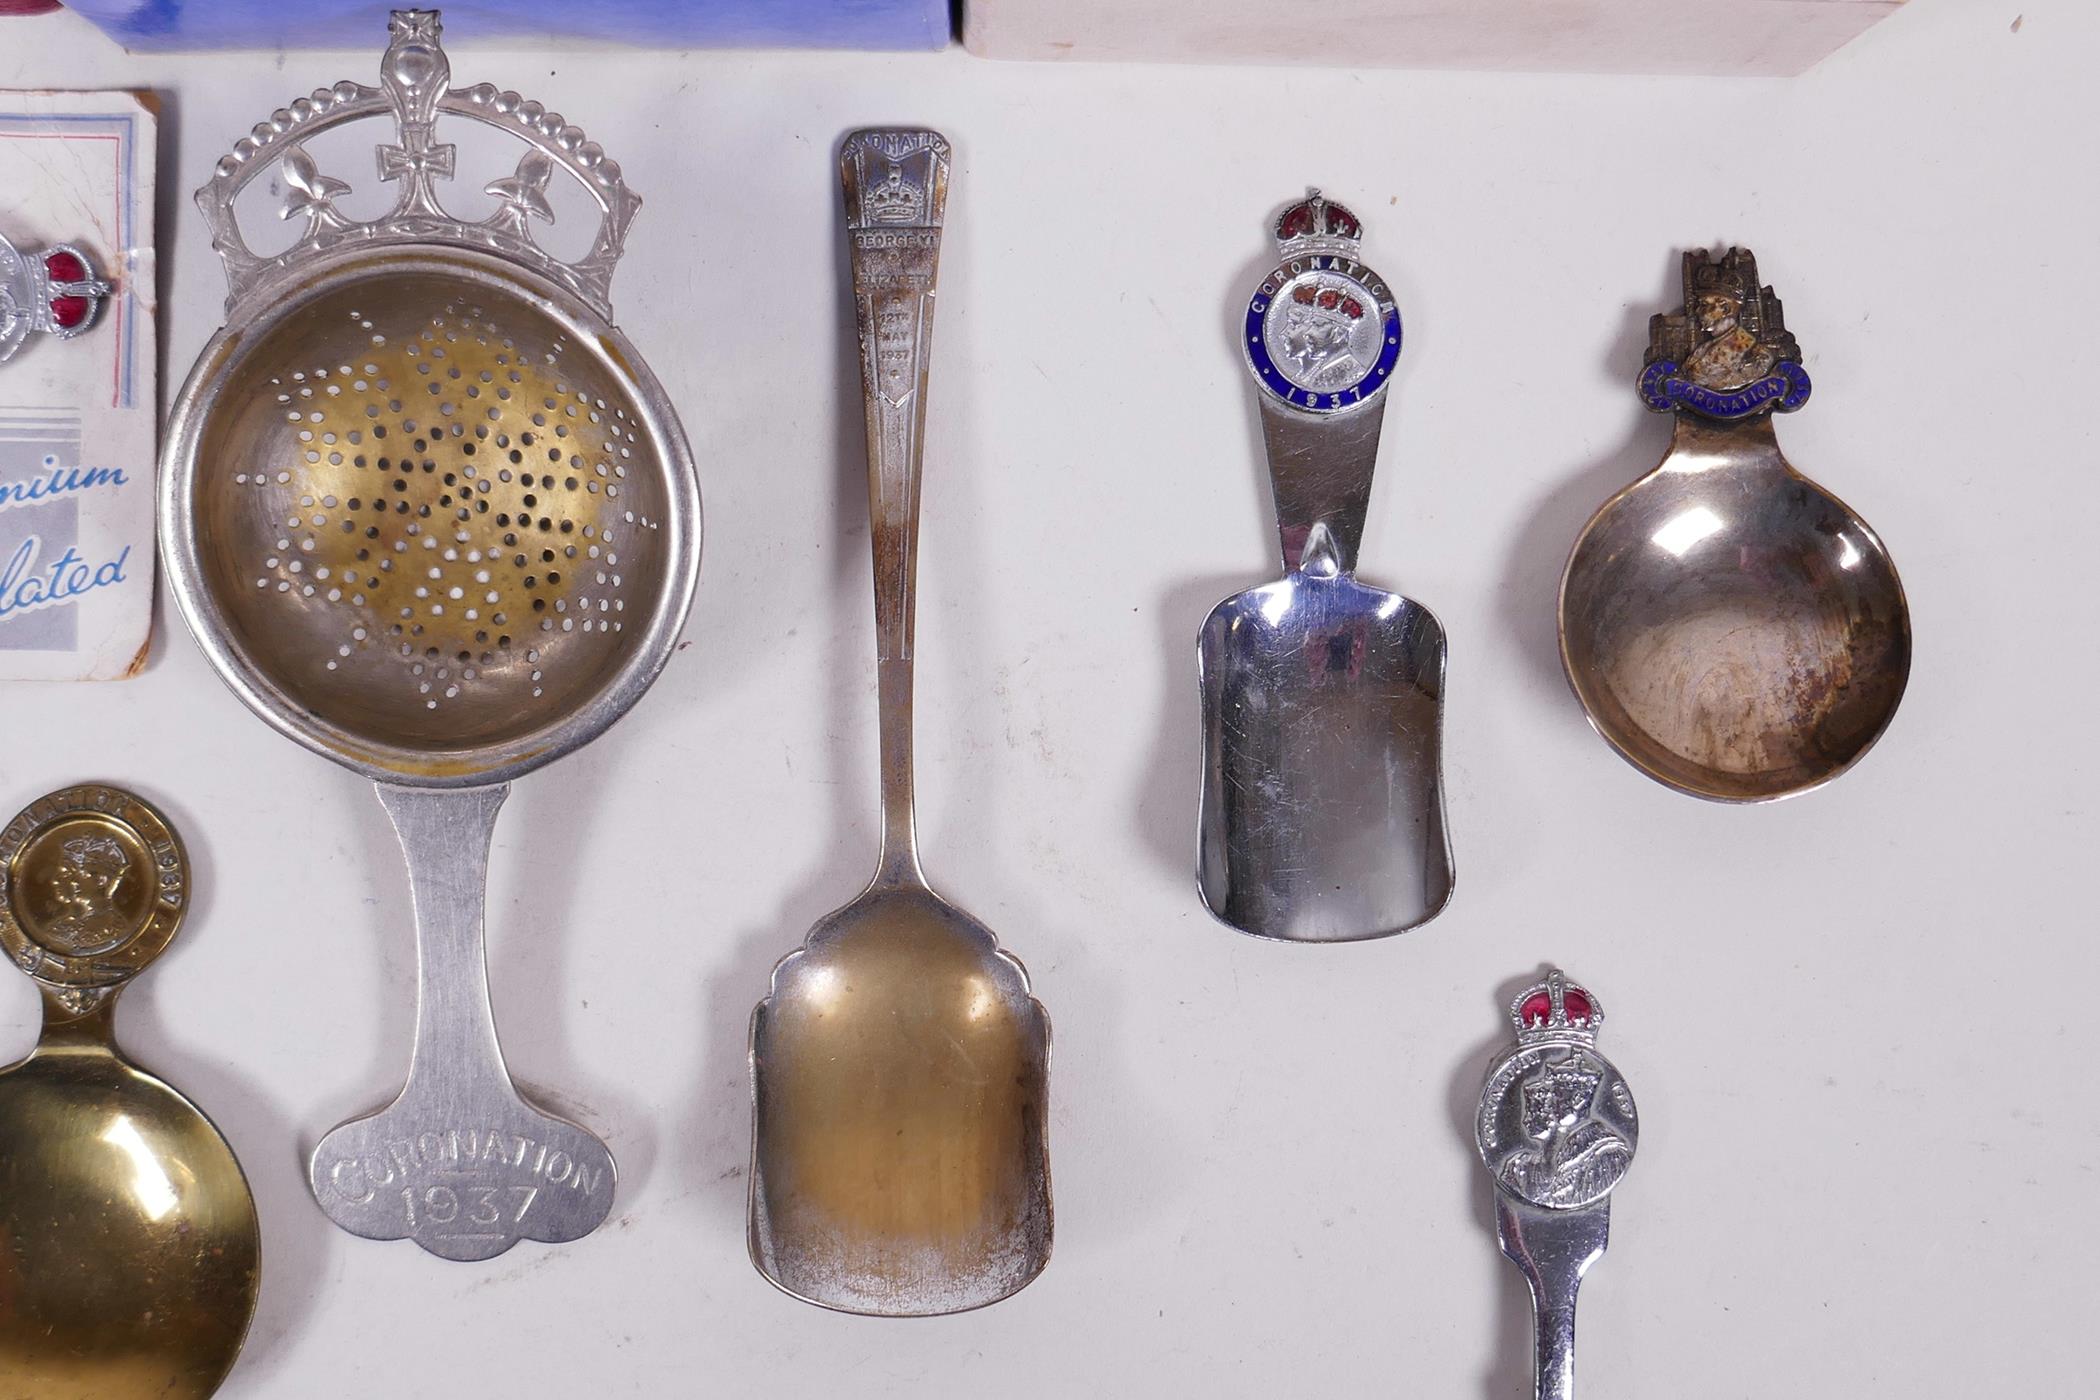 Eight commemorative 1937 coronation tea caddy spoons in silver plate, silver gilt or brass - Image 7 of 12